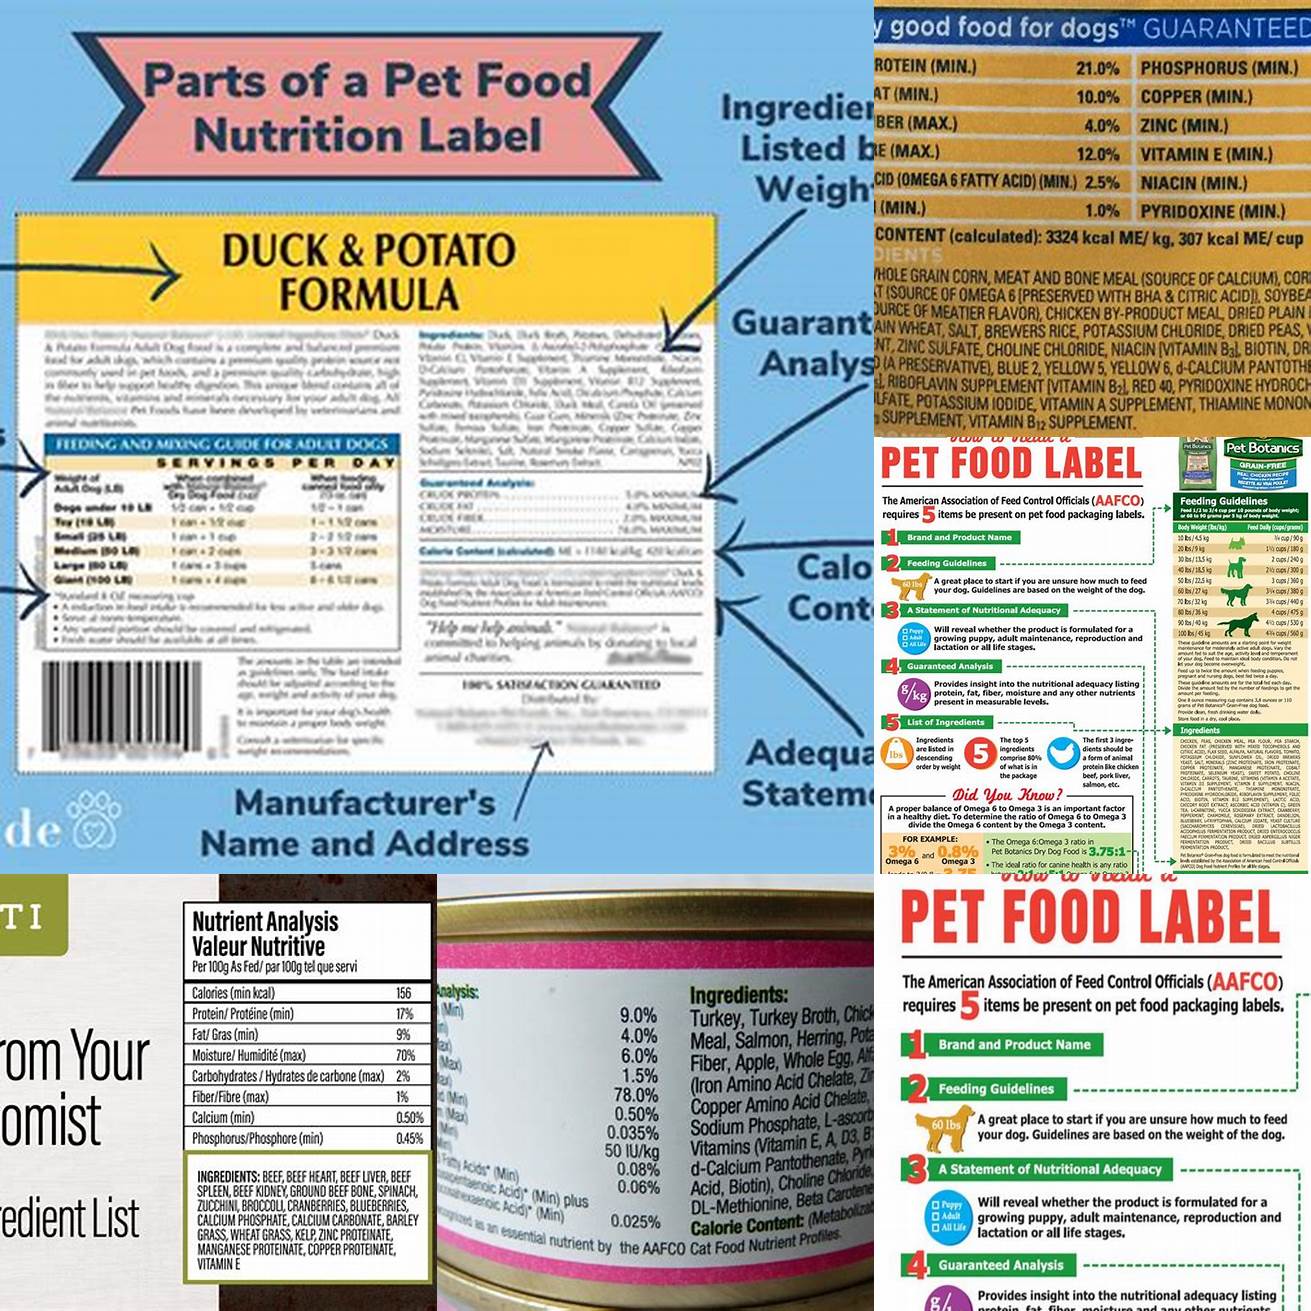 Check the ingredients list on pet food labels